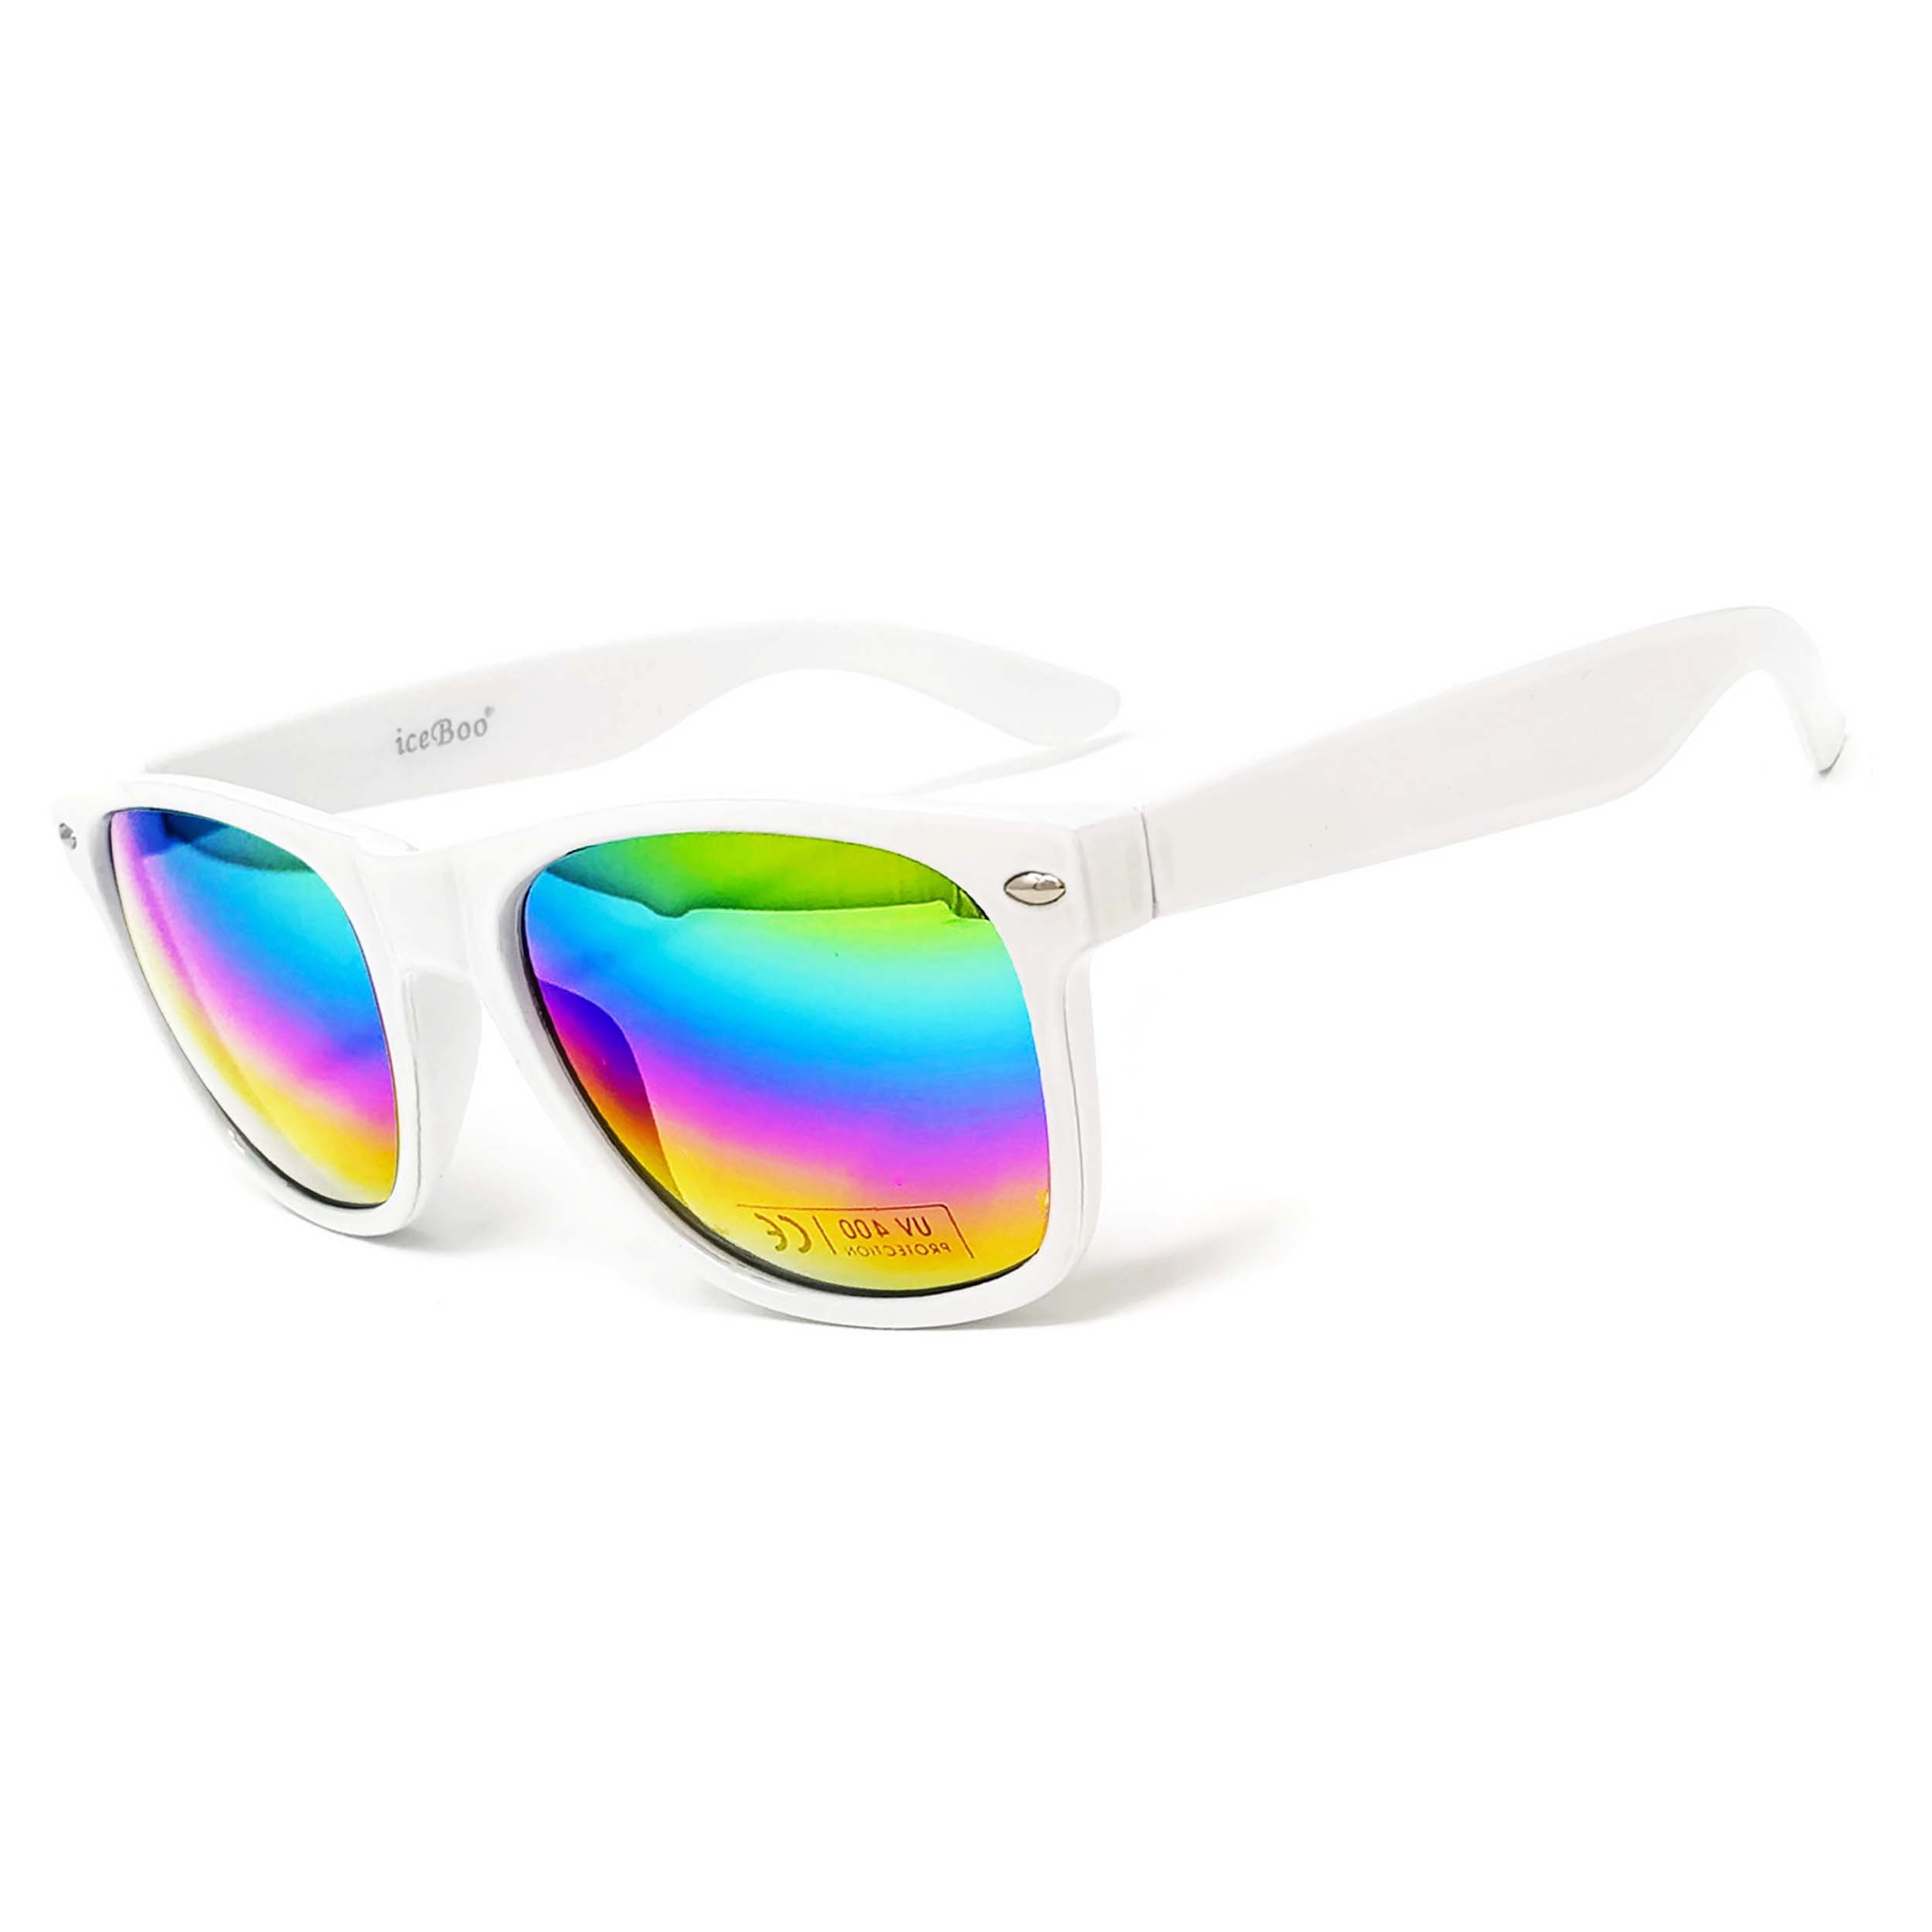 Accessories Rainbow Sunglasses Isolated On White Background Stock Photo -  Download Image Now - iStock